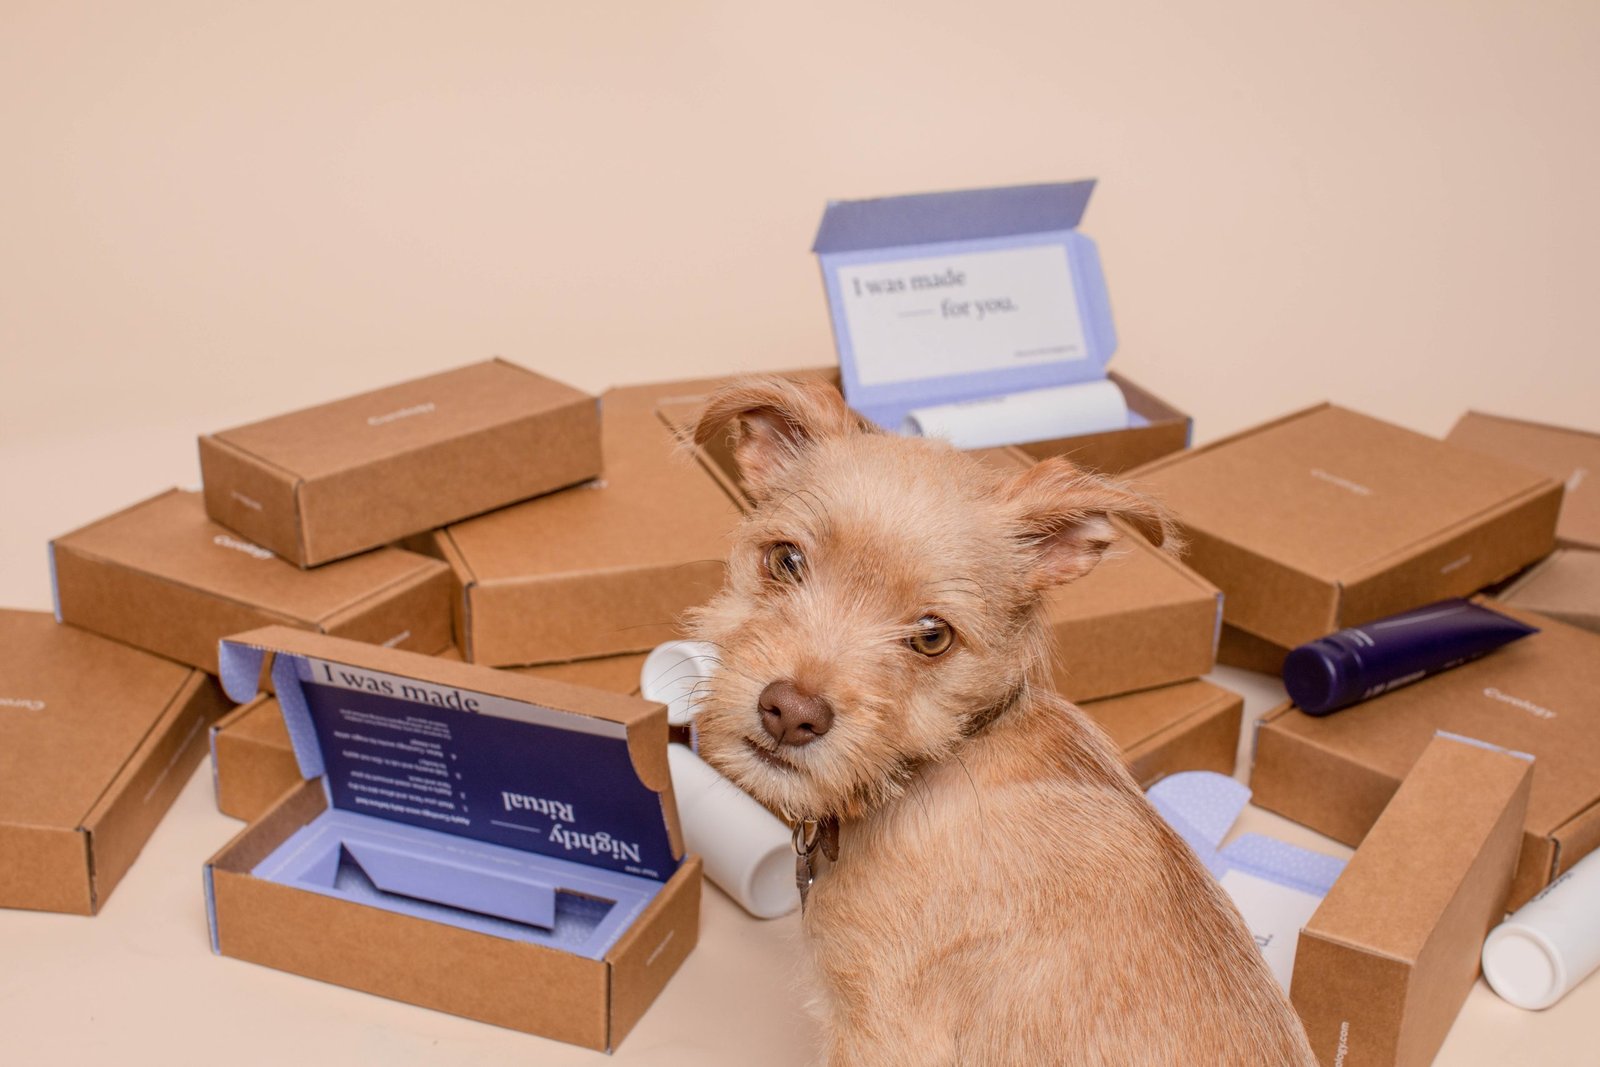 Picture of a puppy with open boxes, because data protection is like puppy-proofing stuff.